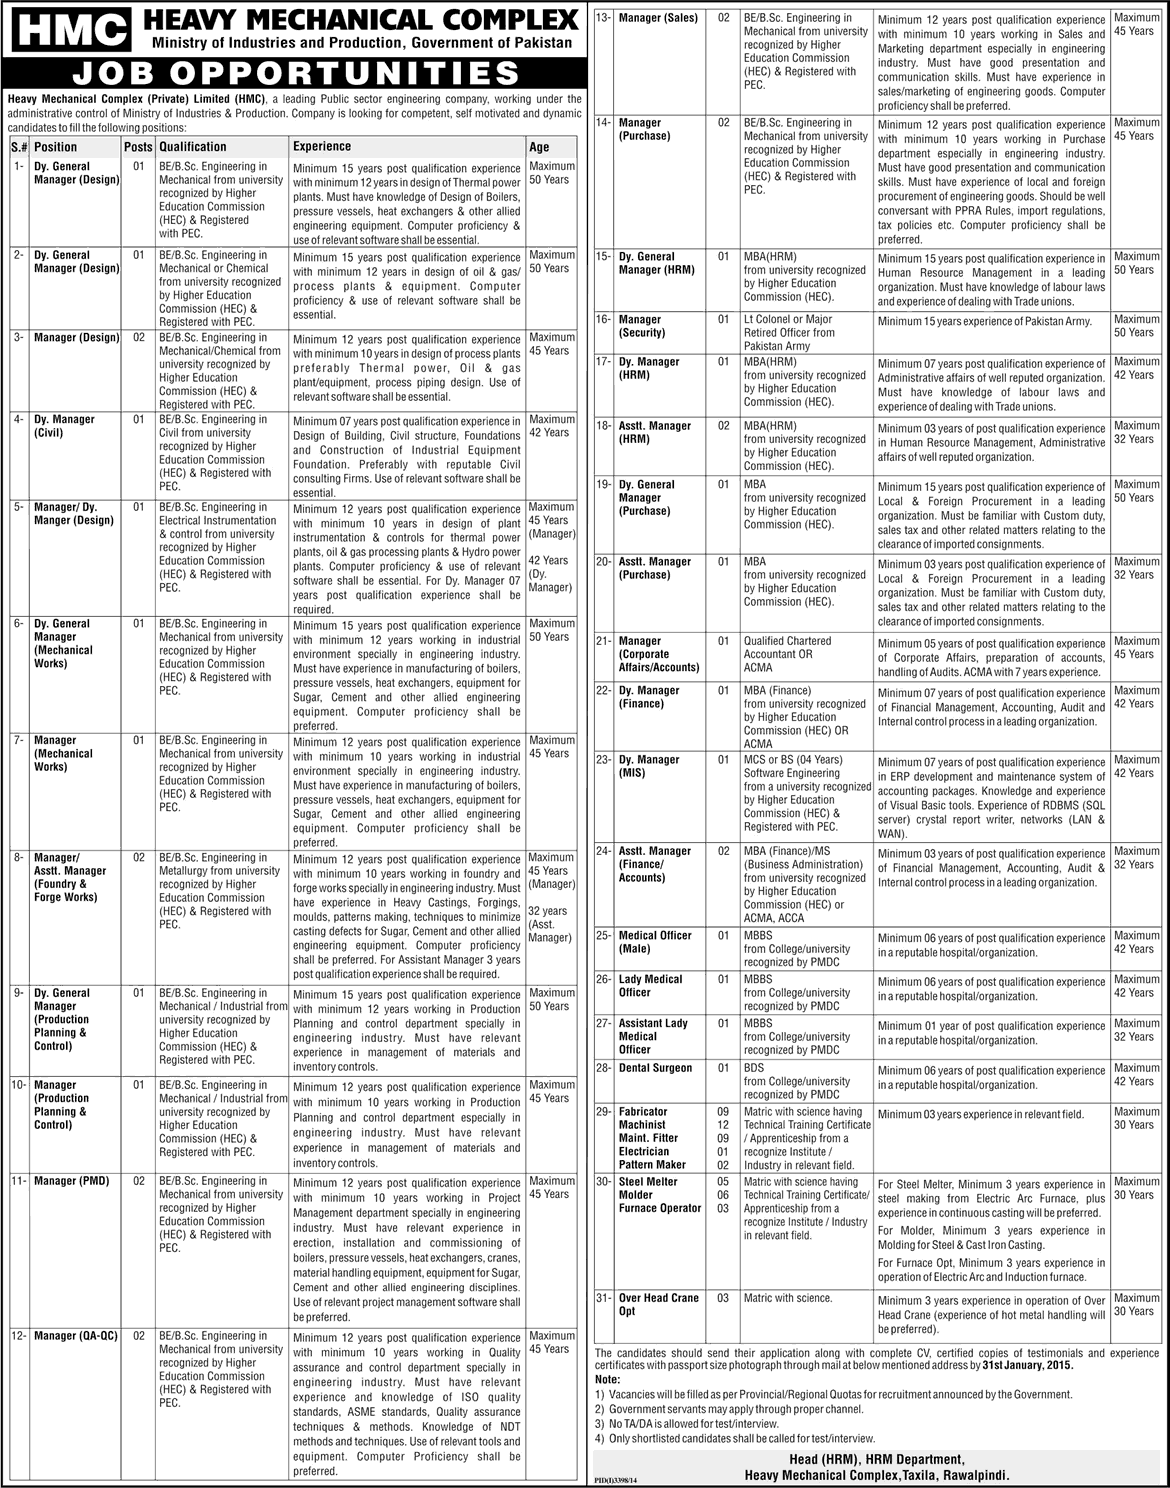 Heavy Mechanical Complex Taxila Jobs 2015 Ministry of Industries & Production Latest